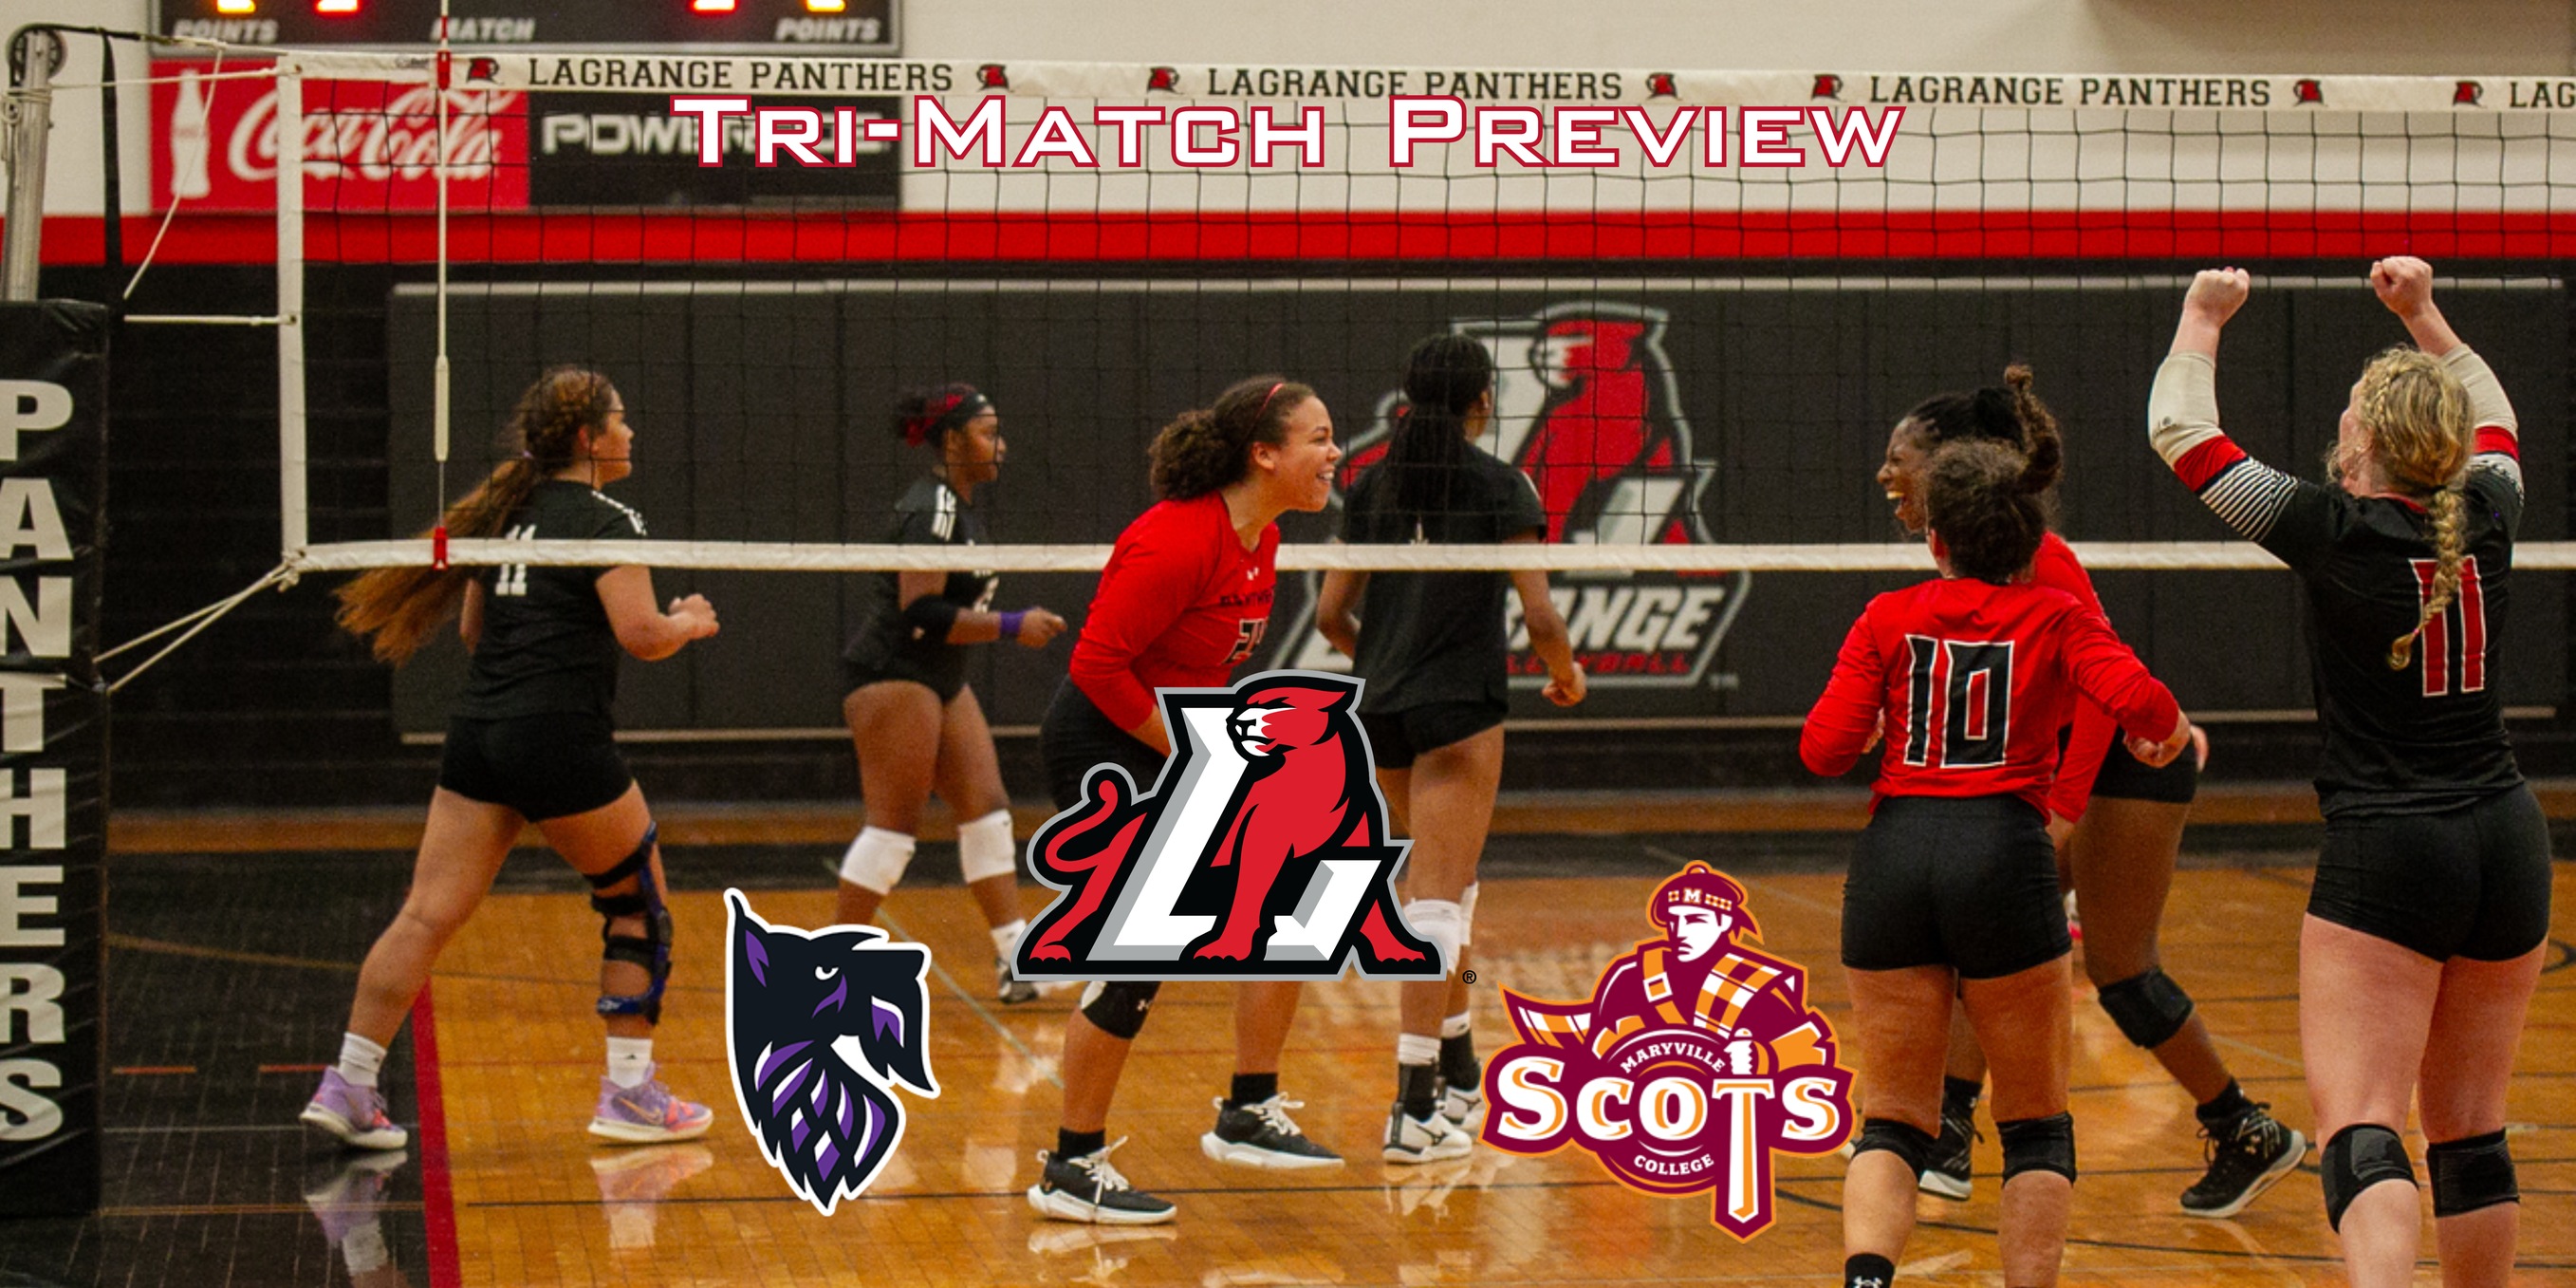 The Panthers compete in another weekend tri-match at Agnes Scott (Oct. 7)